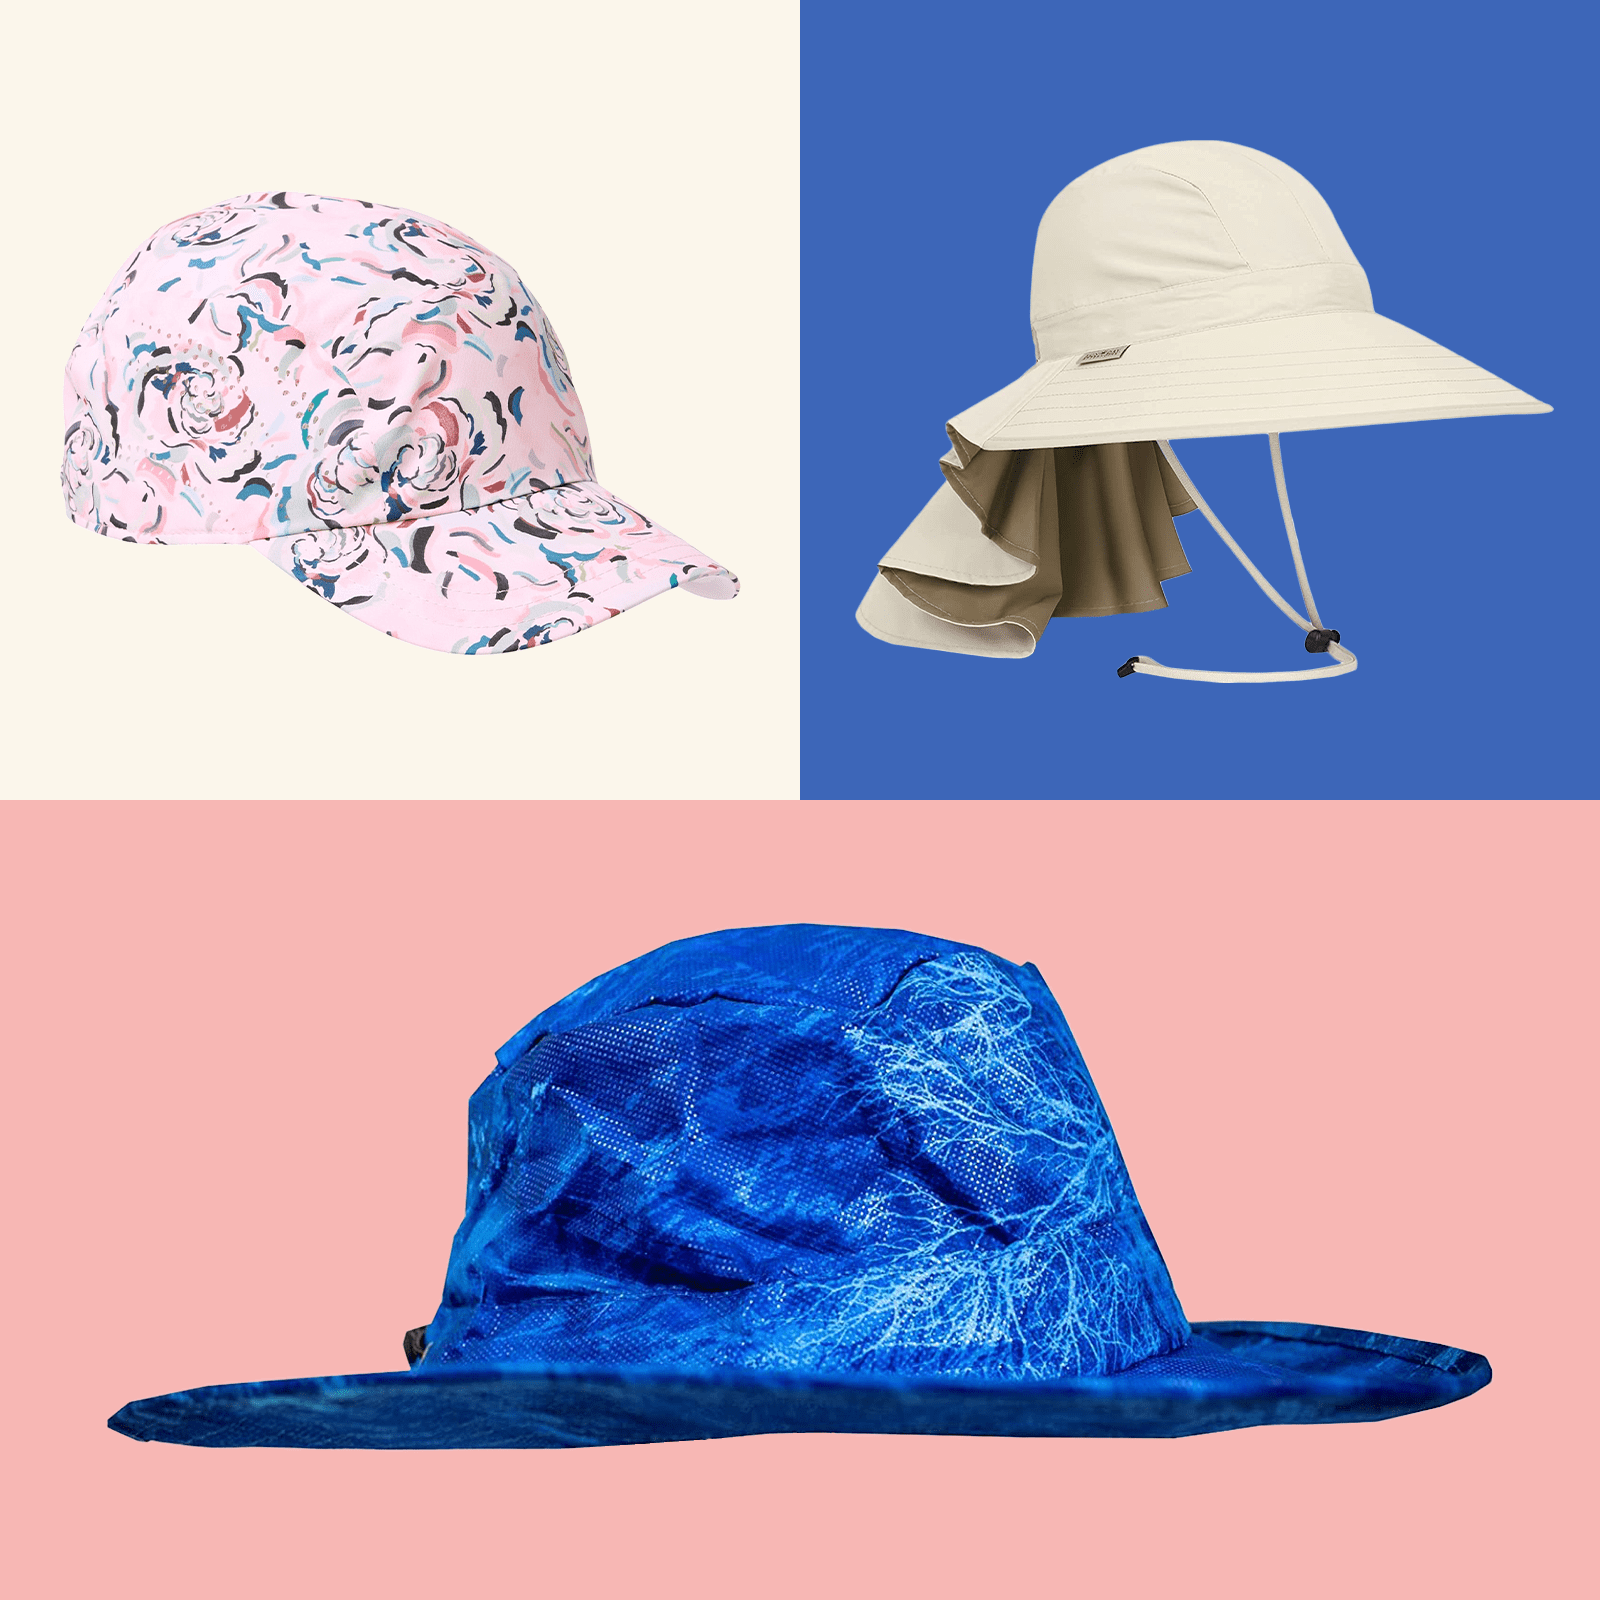 My Retirement Plan is The Total Collapse Bucket Hat